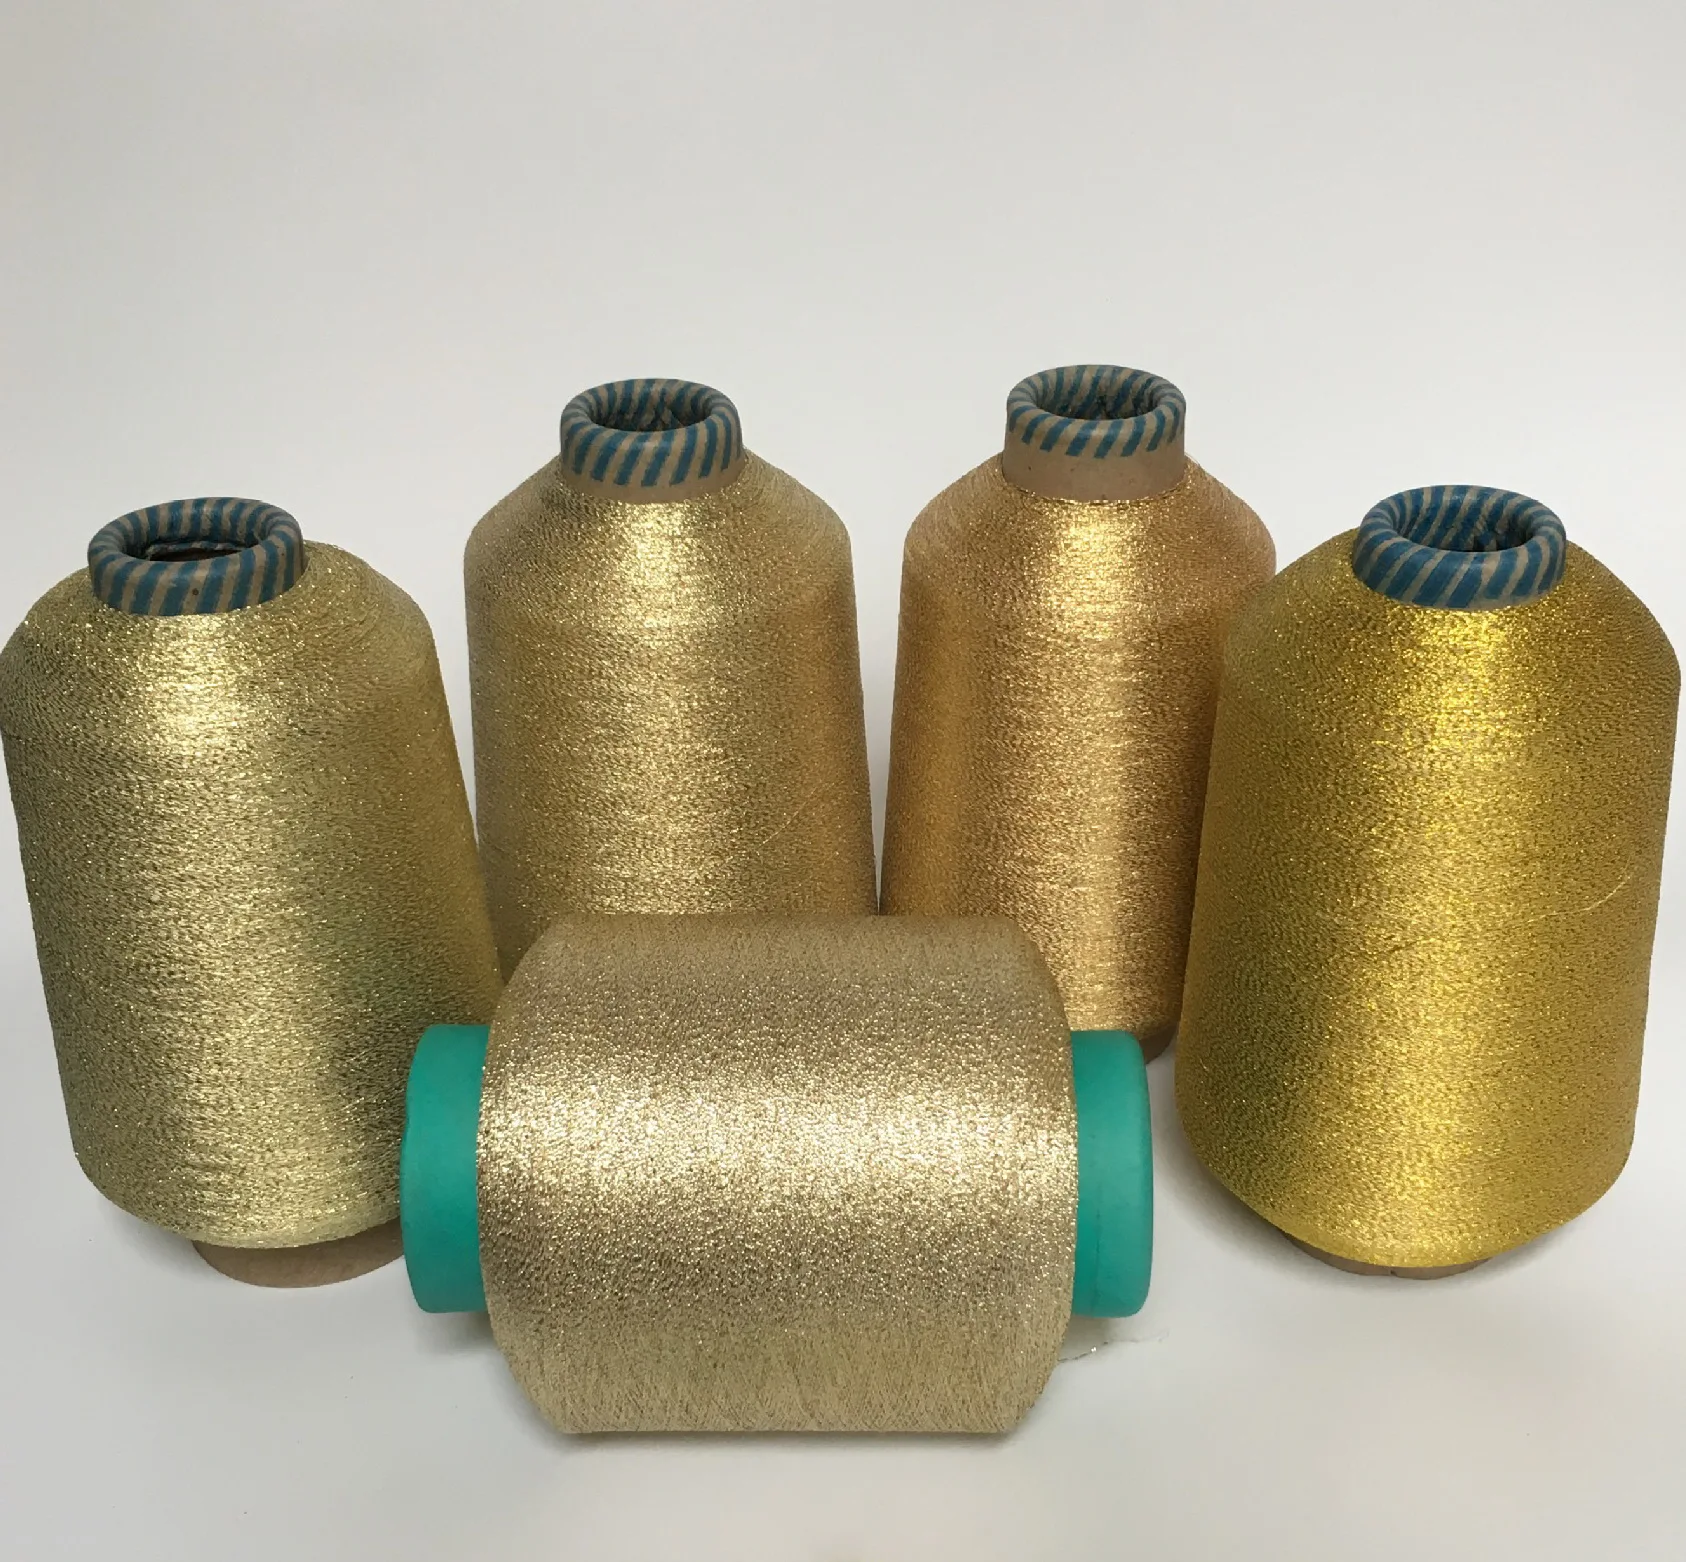 Thread Wholesale Manufacturer Lurex Metallic Yarn for Embroidery Quantity OEM Book Anti China Time Lead Packing Random Sewing